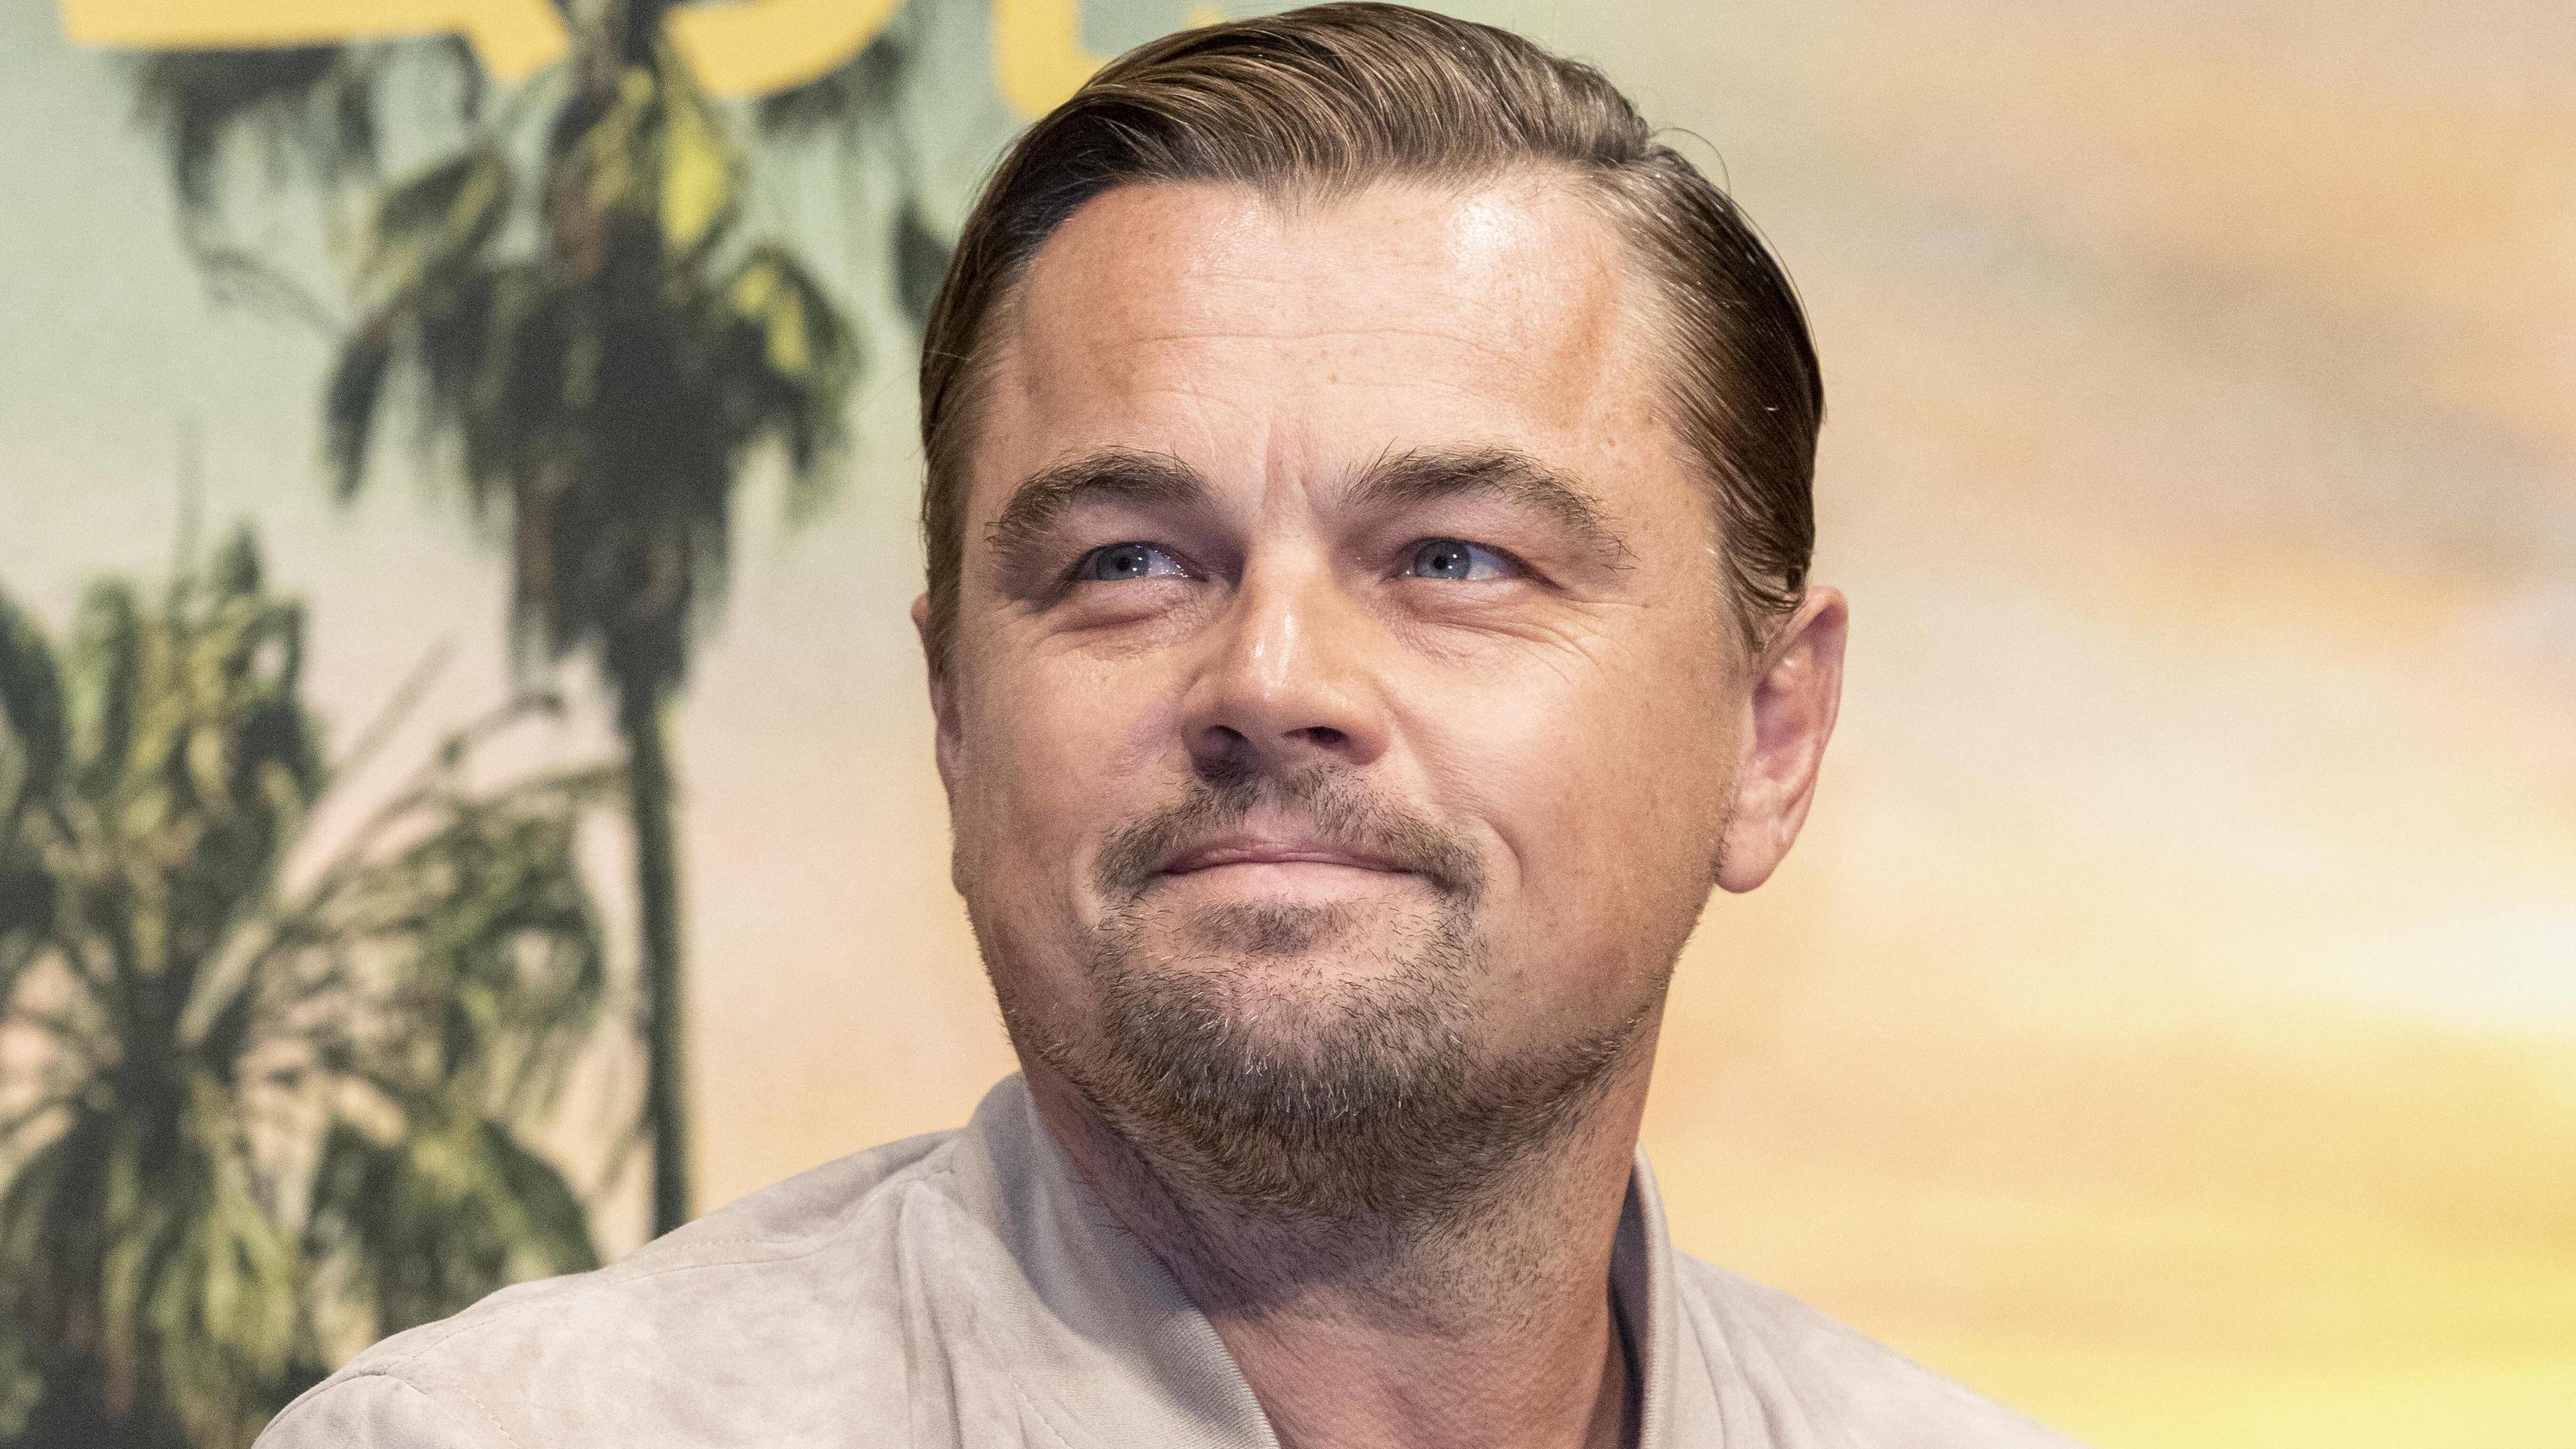 August 26, 2019, Tokyo, Japan: American actor Leonardo DiCaprio attends a news conference for the film Once Upon a Time In Hollywood in downtown Tokyo. DiCaprio, director Quentin Tarantino and producer Shannon McIntosh came to Japan to promote their 